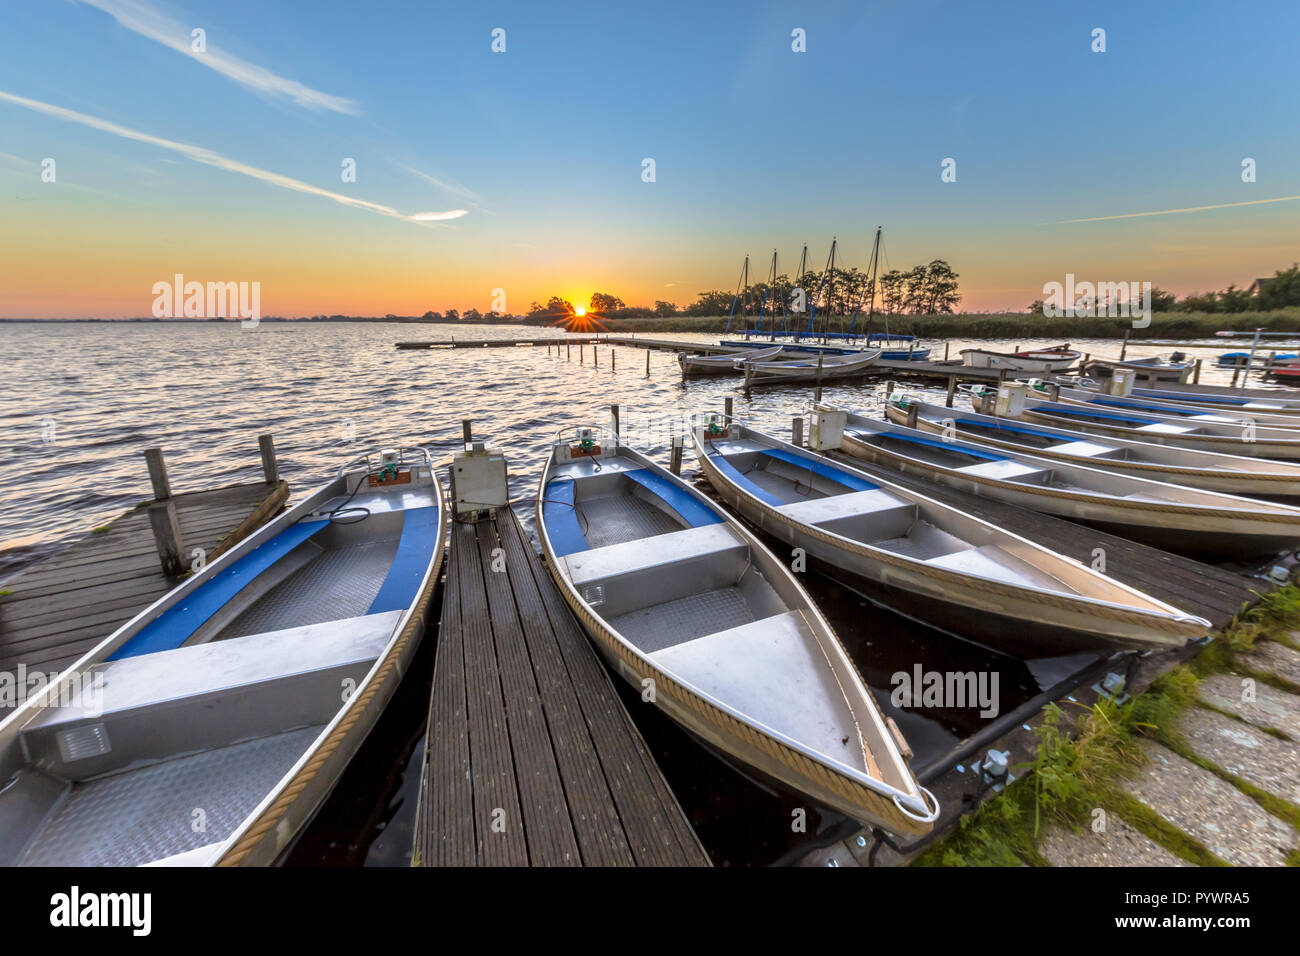 Row of rental boats in a dutch marina while the sun is rising over the horizon Stock Photo